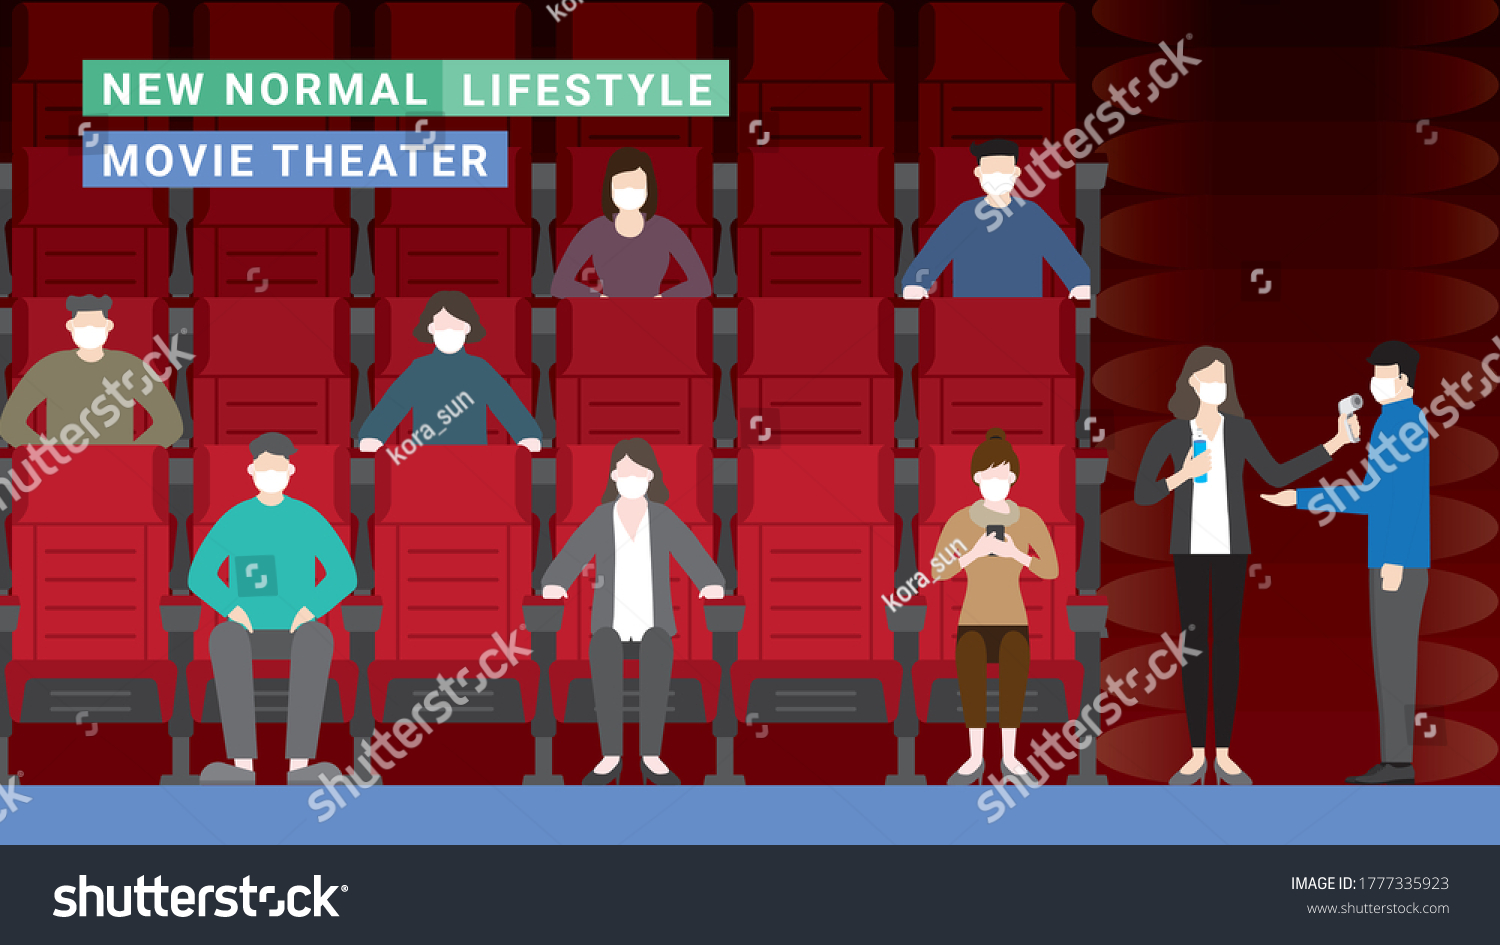 SVG of Movie theater new normal lifestyle after pandemic COVID-19 coronavirus. Social distancing, Wearing masks, Thermal check and Hand sanitizing at entrance. Flat design style illustration vector concept. svg